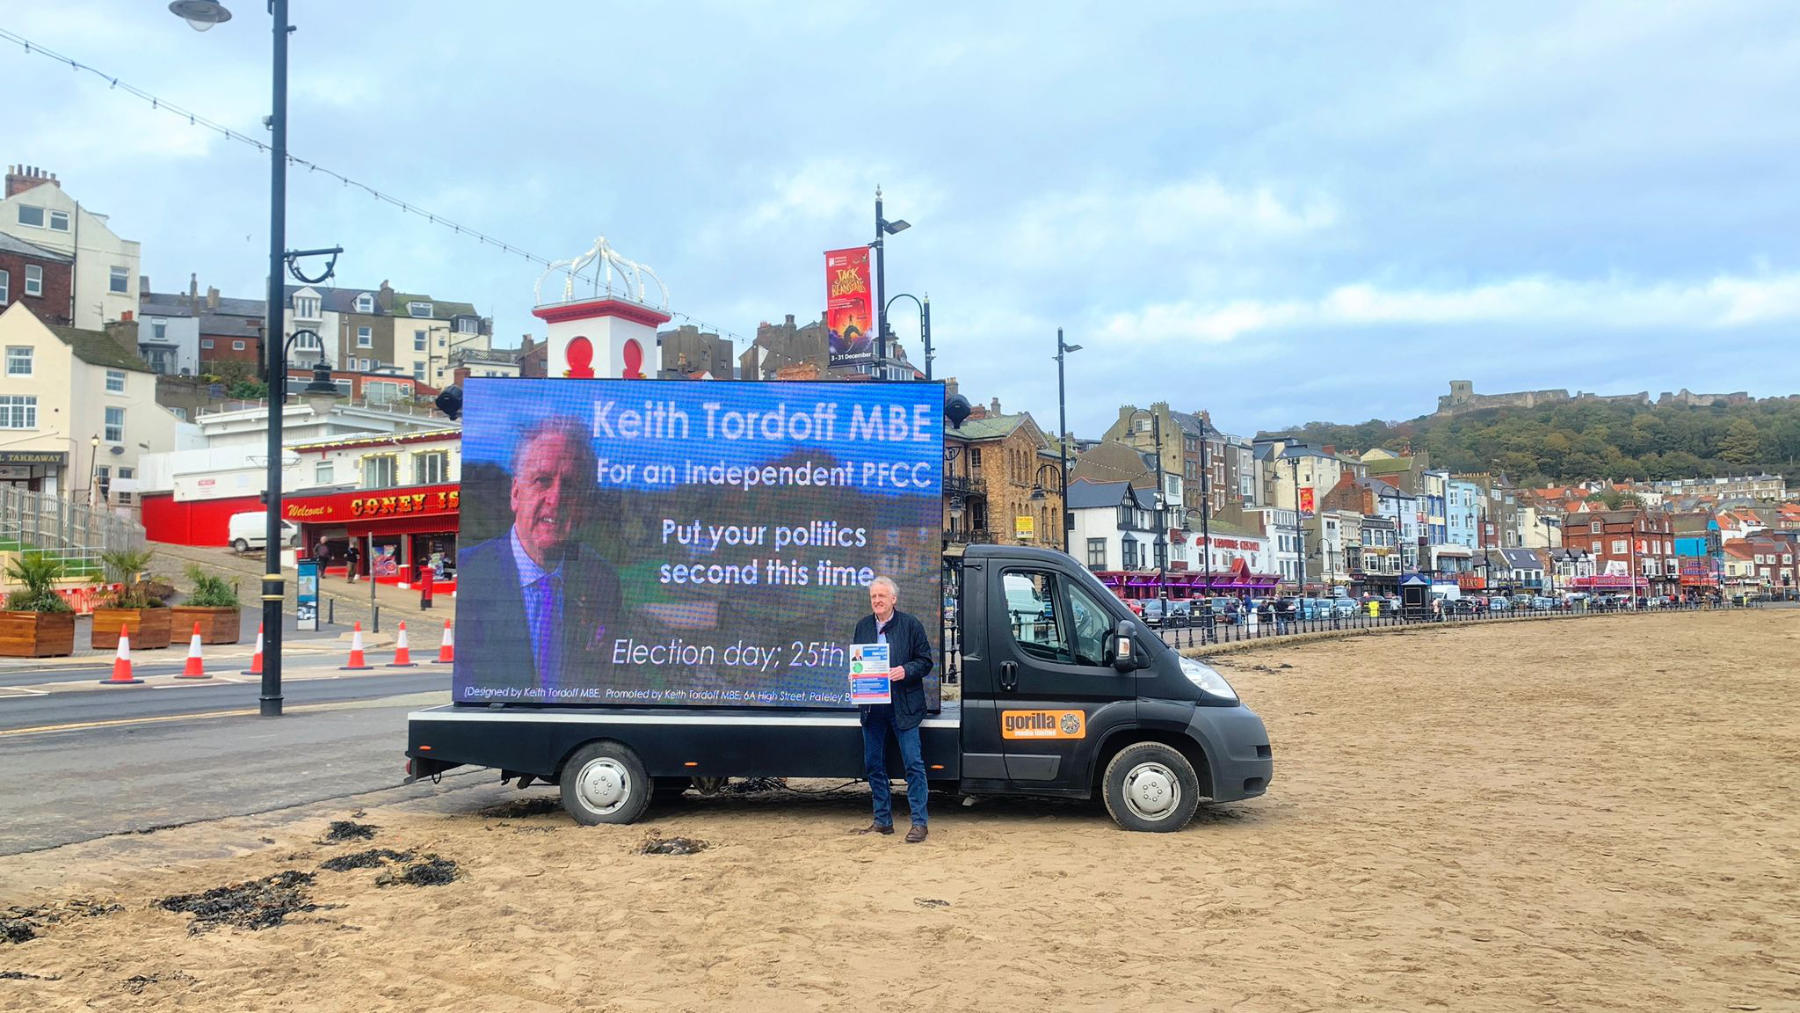 As the Independent candidate Keith Tordoff has hired a digital advertising van to try to publicise my campaign messages. Photographed at Scarborough after visiting Filey and before going to Whitby